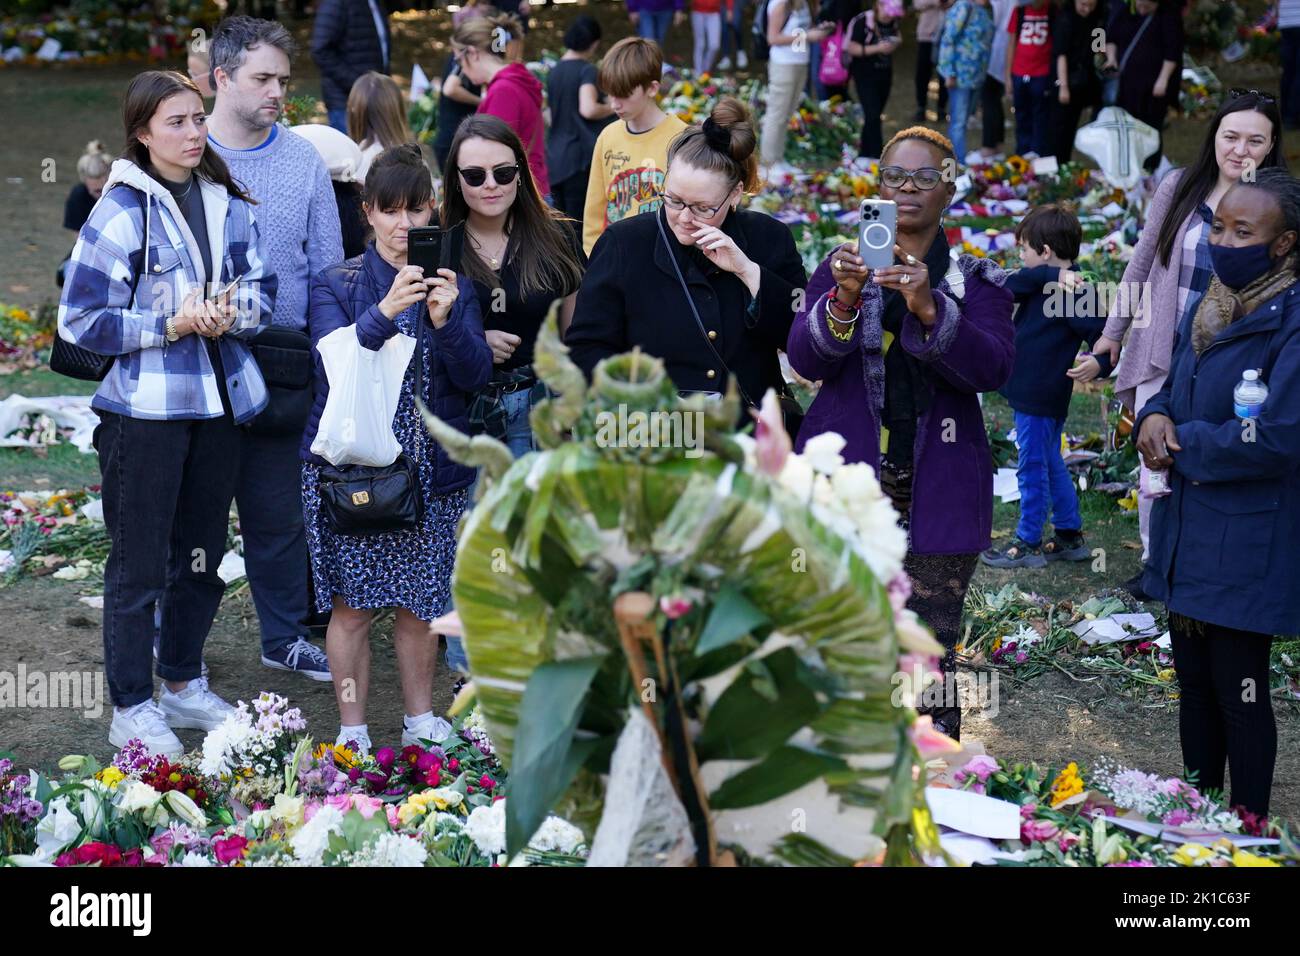 Members of the public view flowers and tributes to Queen Elizabeth II in Green Park in London, ahead of her funeral on Monday. Picture date: Saturday September 17, 2022. Stock Photo